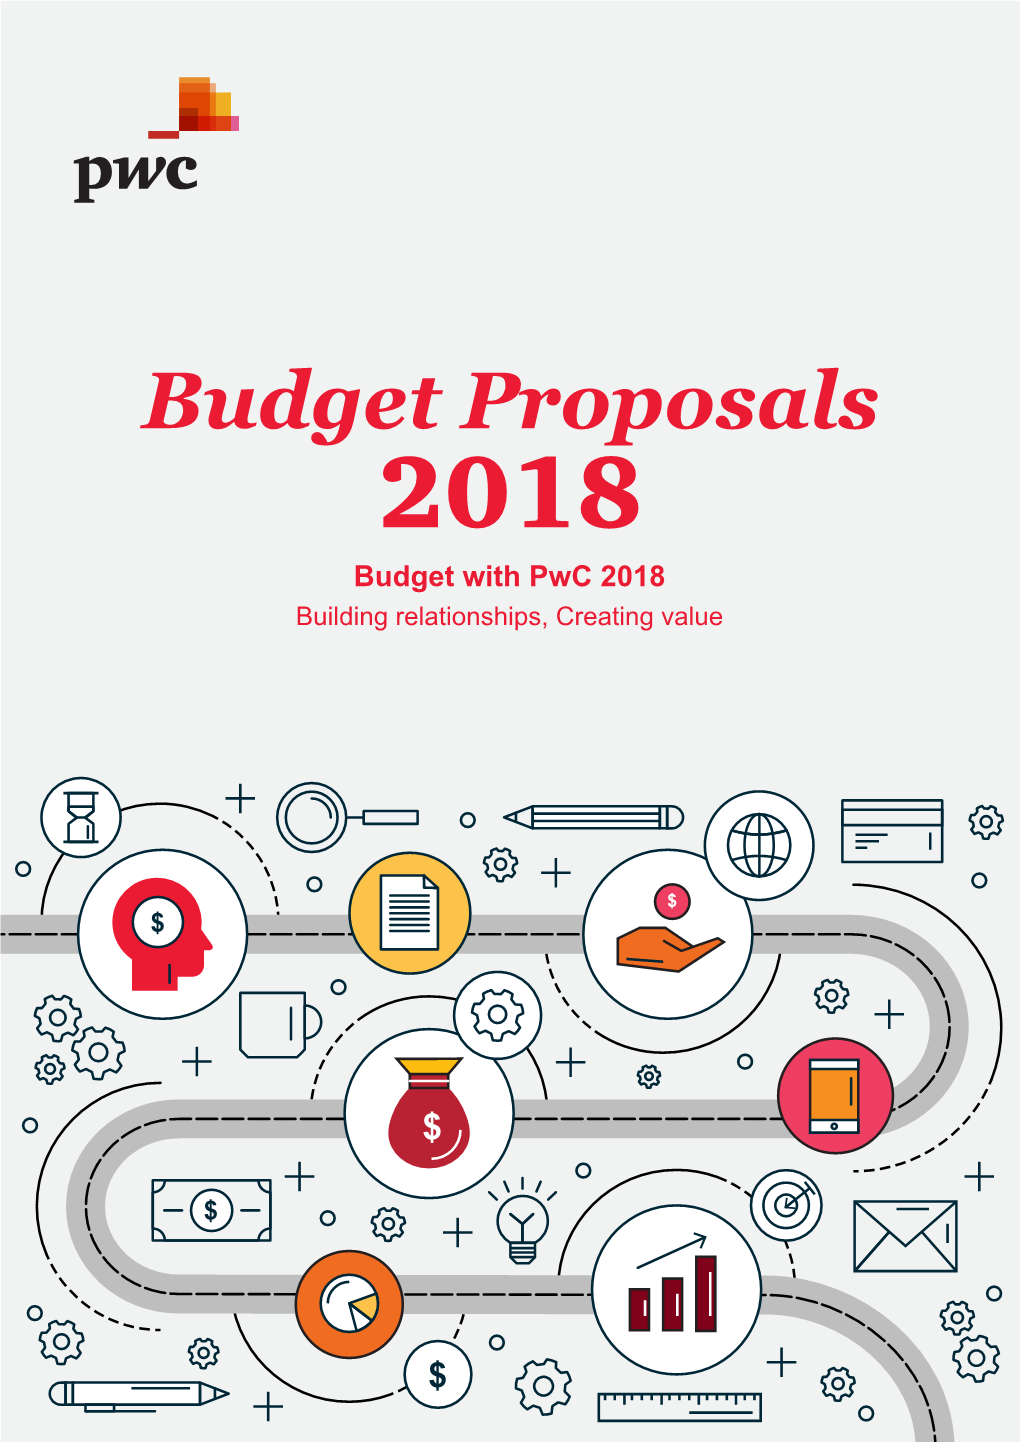 Budget Proposals 2018 Budget with Pwc 2018 Building Relationships, Creating Value